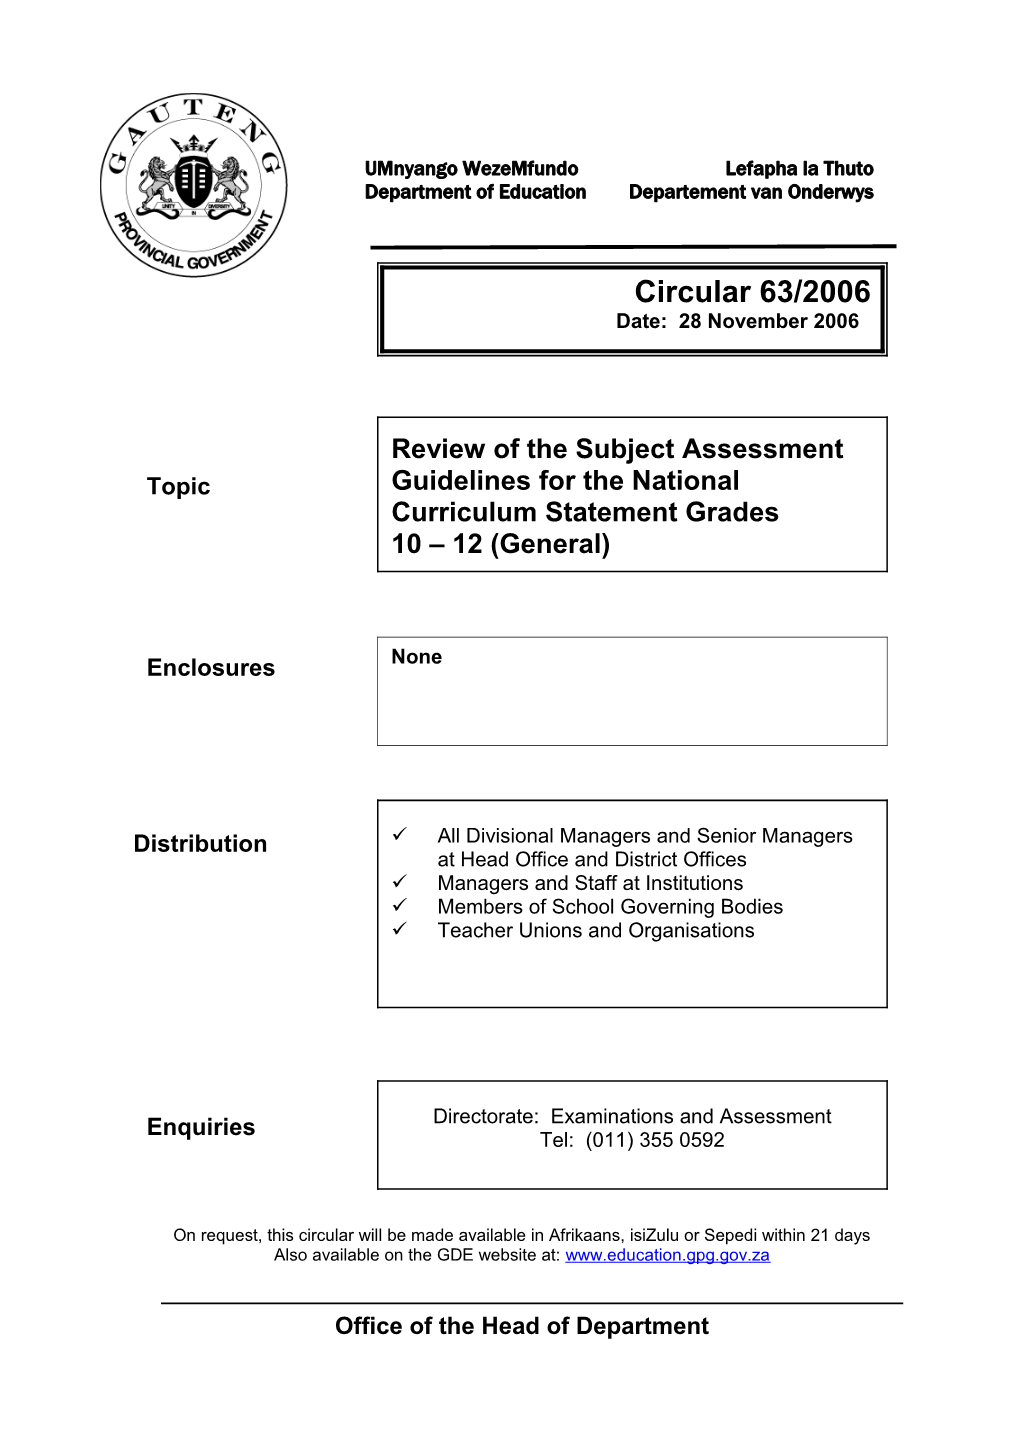 Circular63.2006 Review of the Subject Assessment Guidelines for the National Curriculum